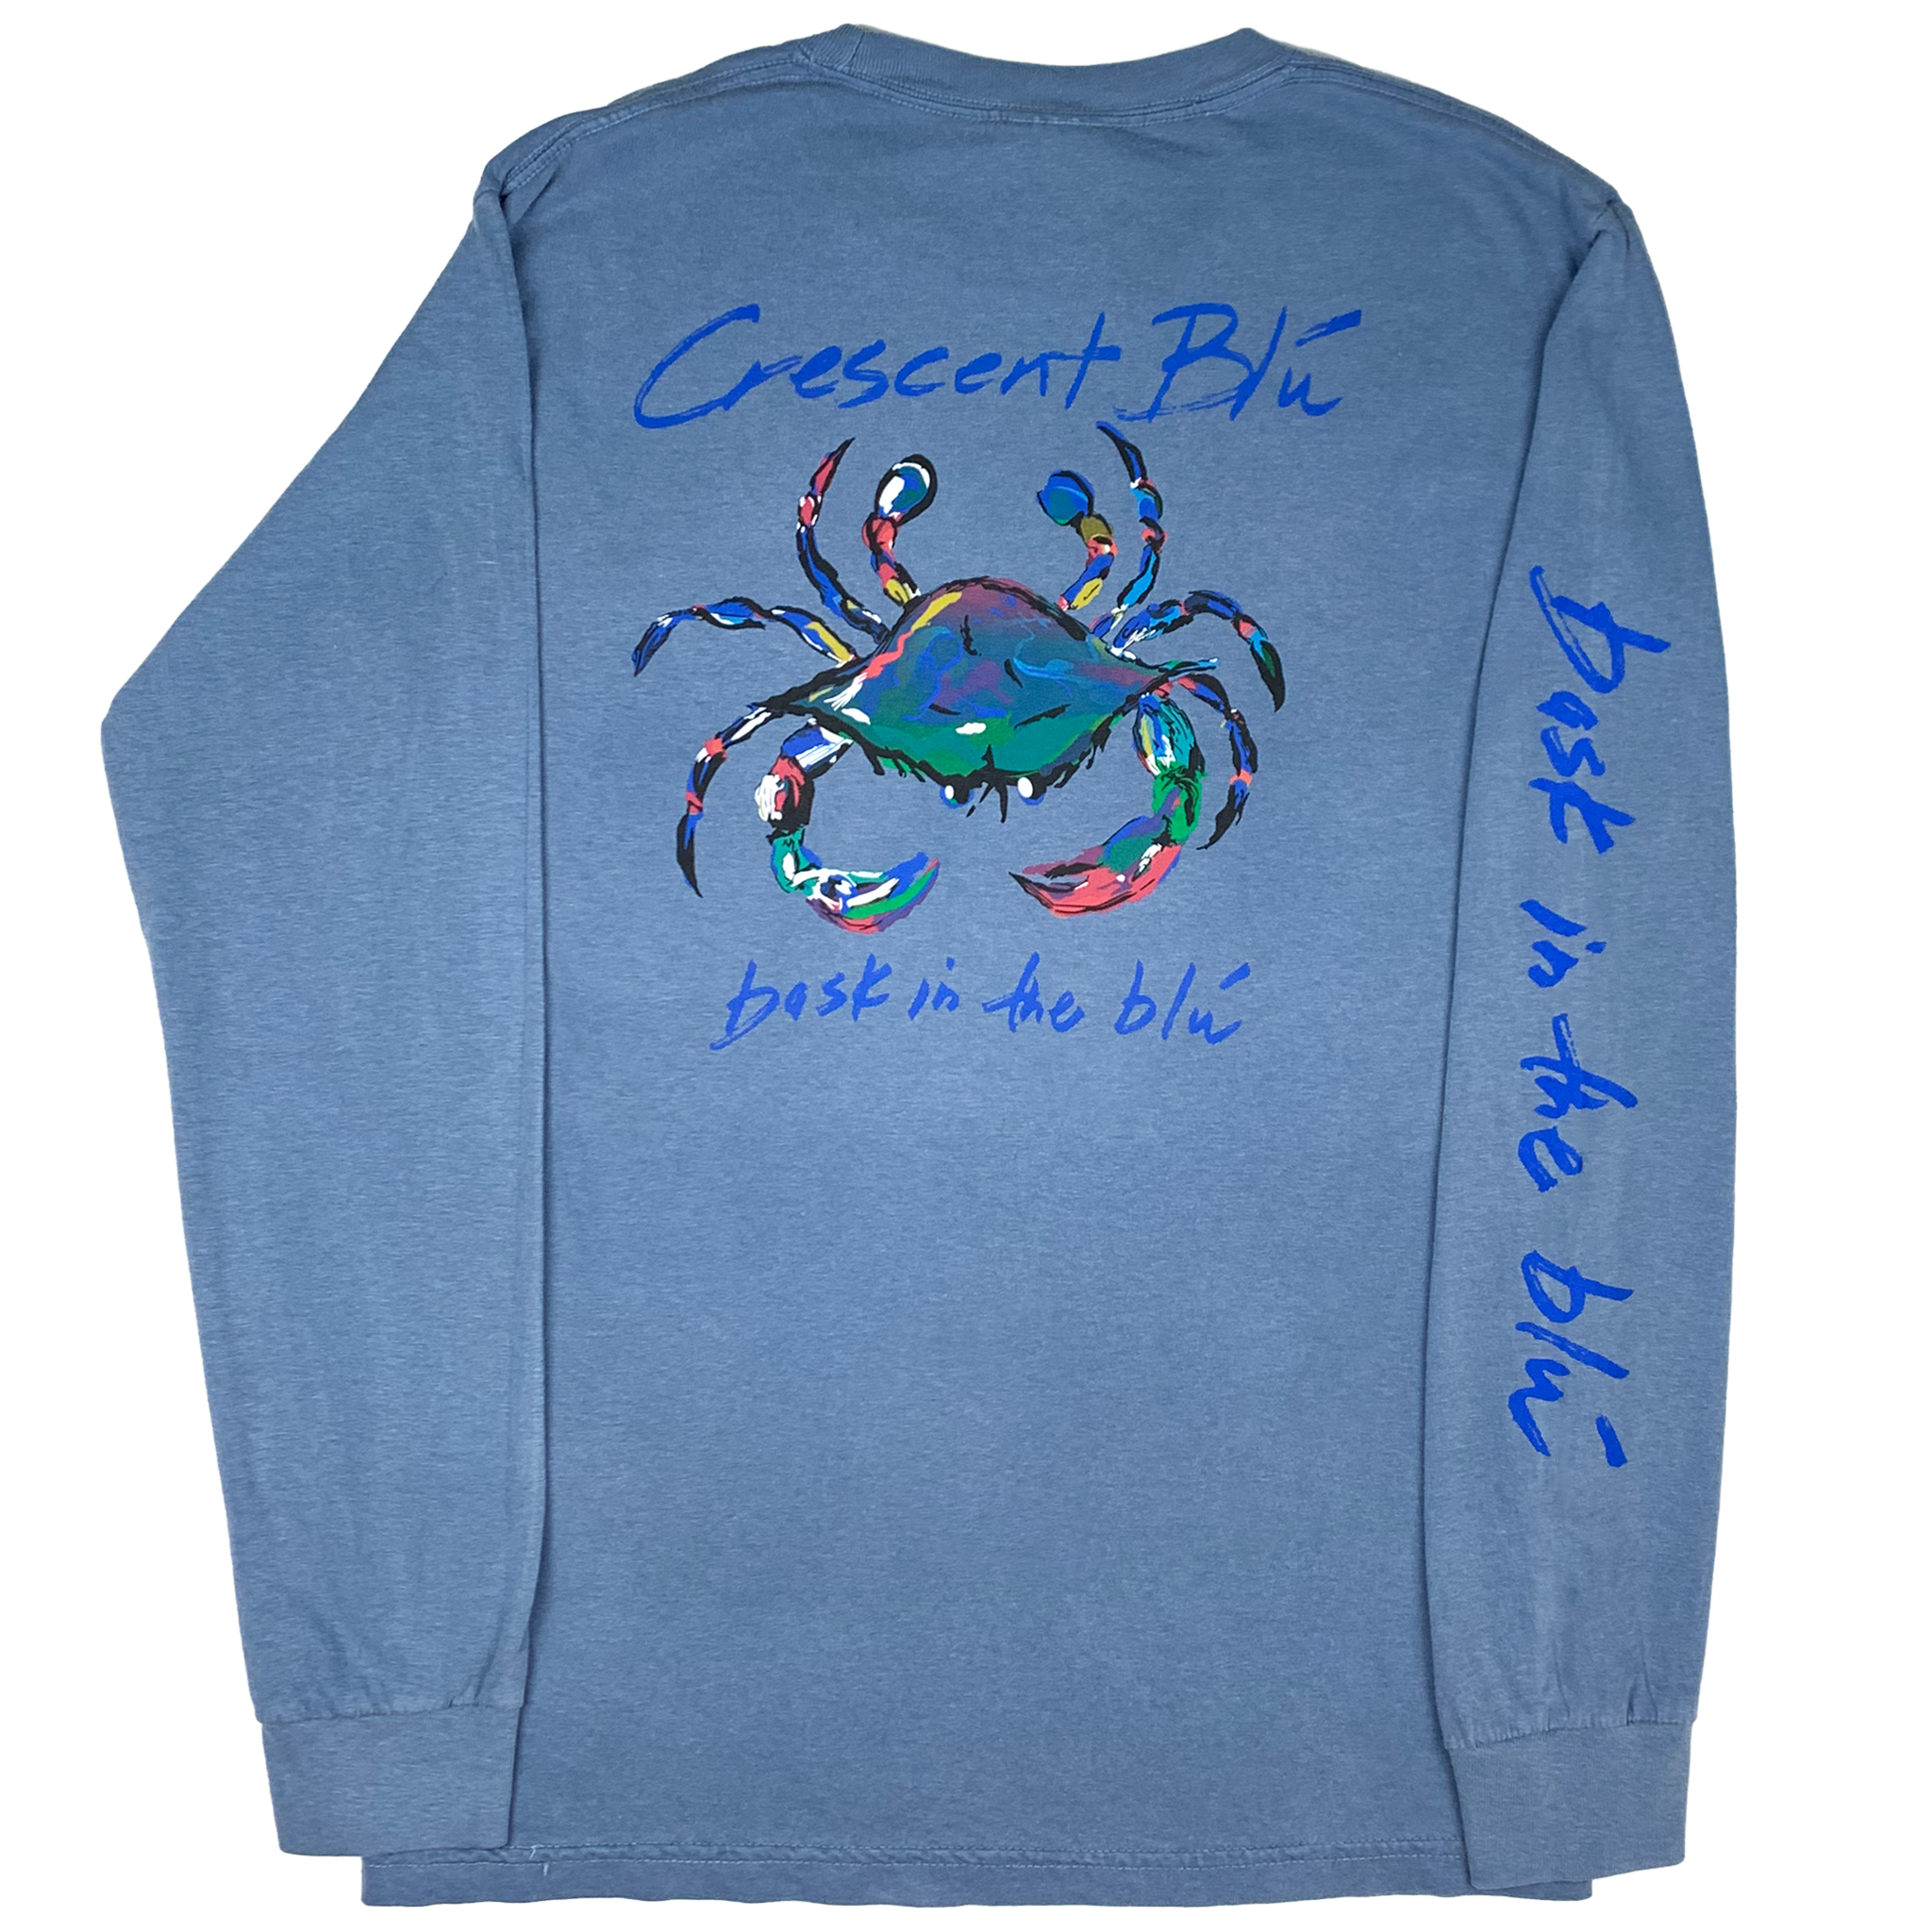 View of back of adult long sleeve, blue jean colored, t-shirt with large multi-colored Crescent Blu Signature Collection crab logo printed on back. Bask in the Blu tagline printed on the right sleeve. 